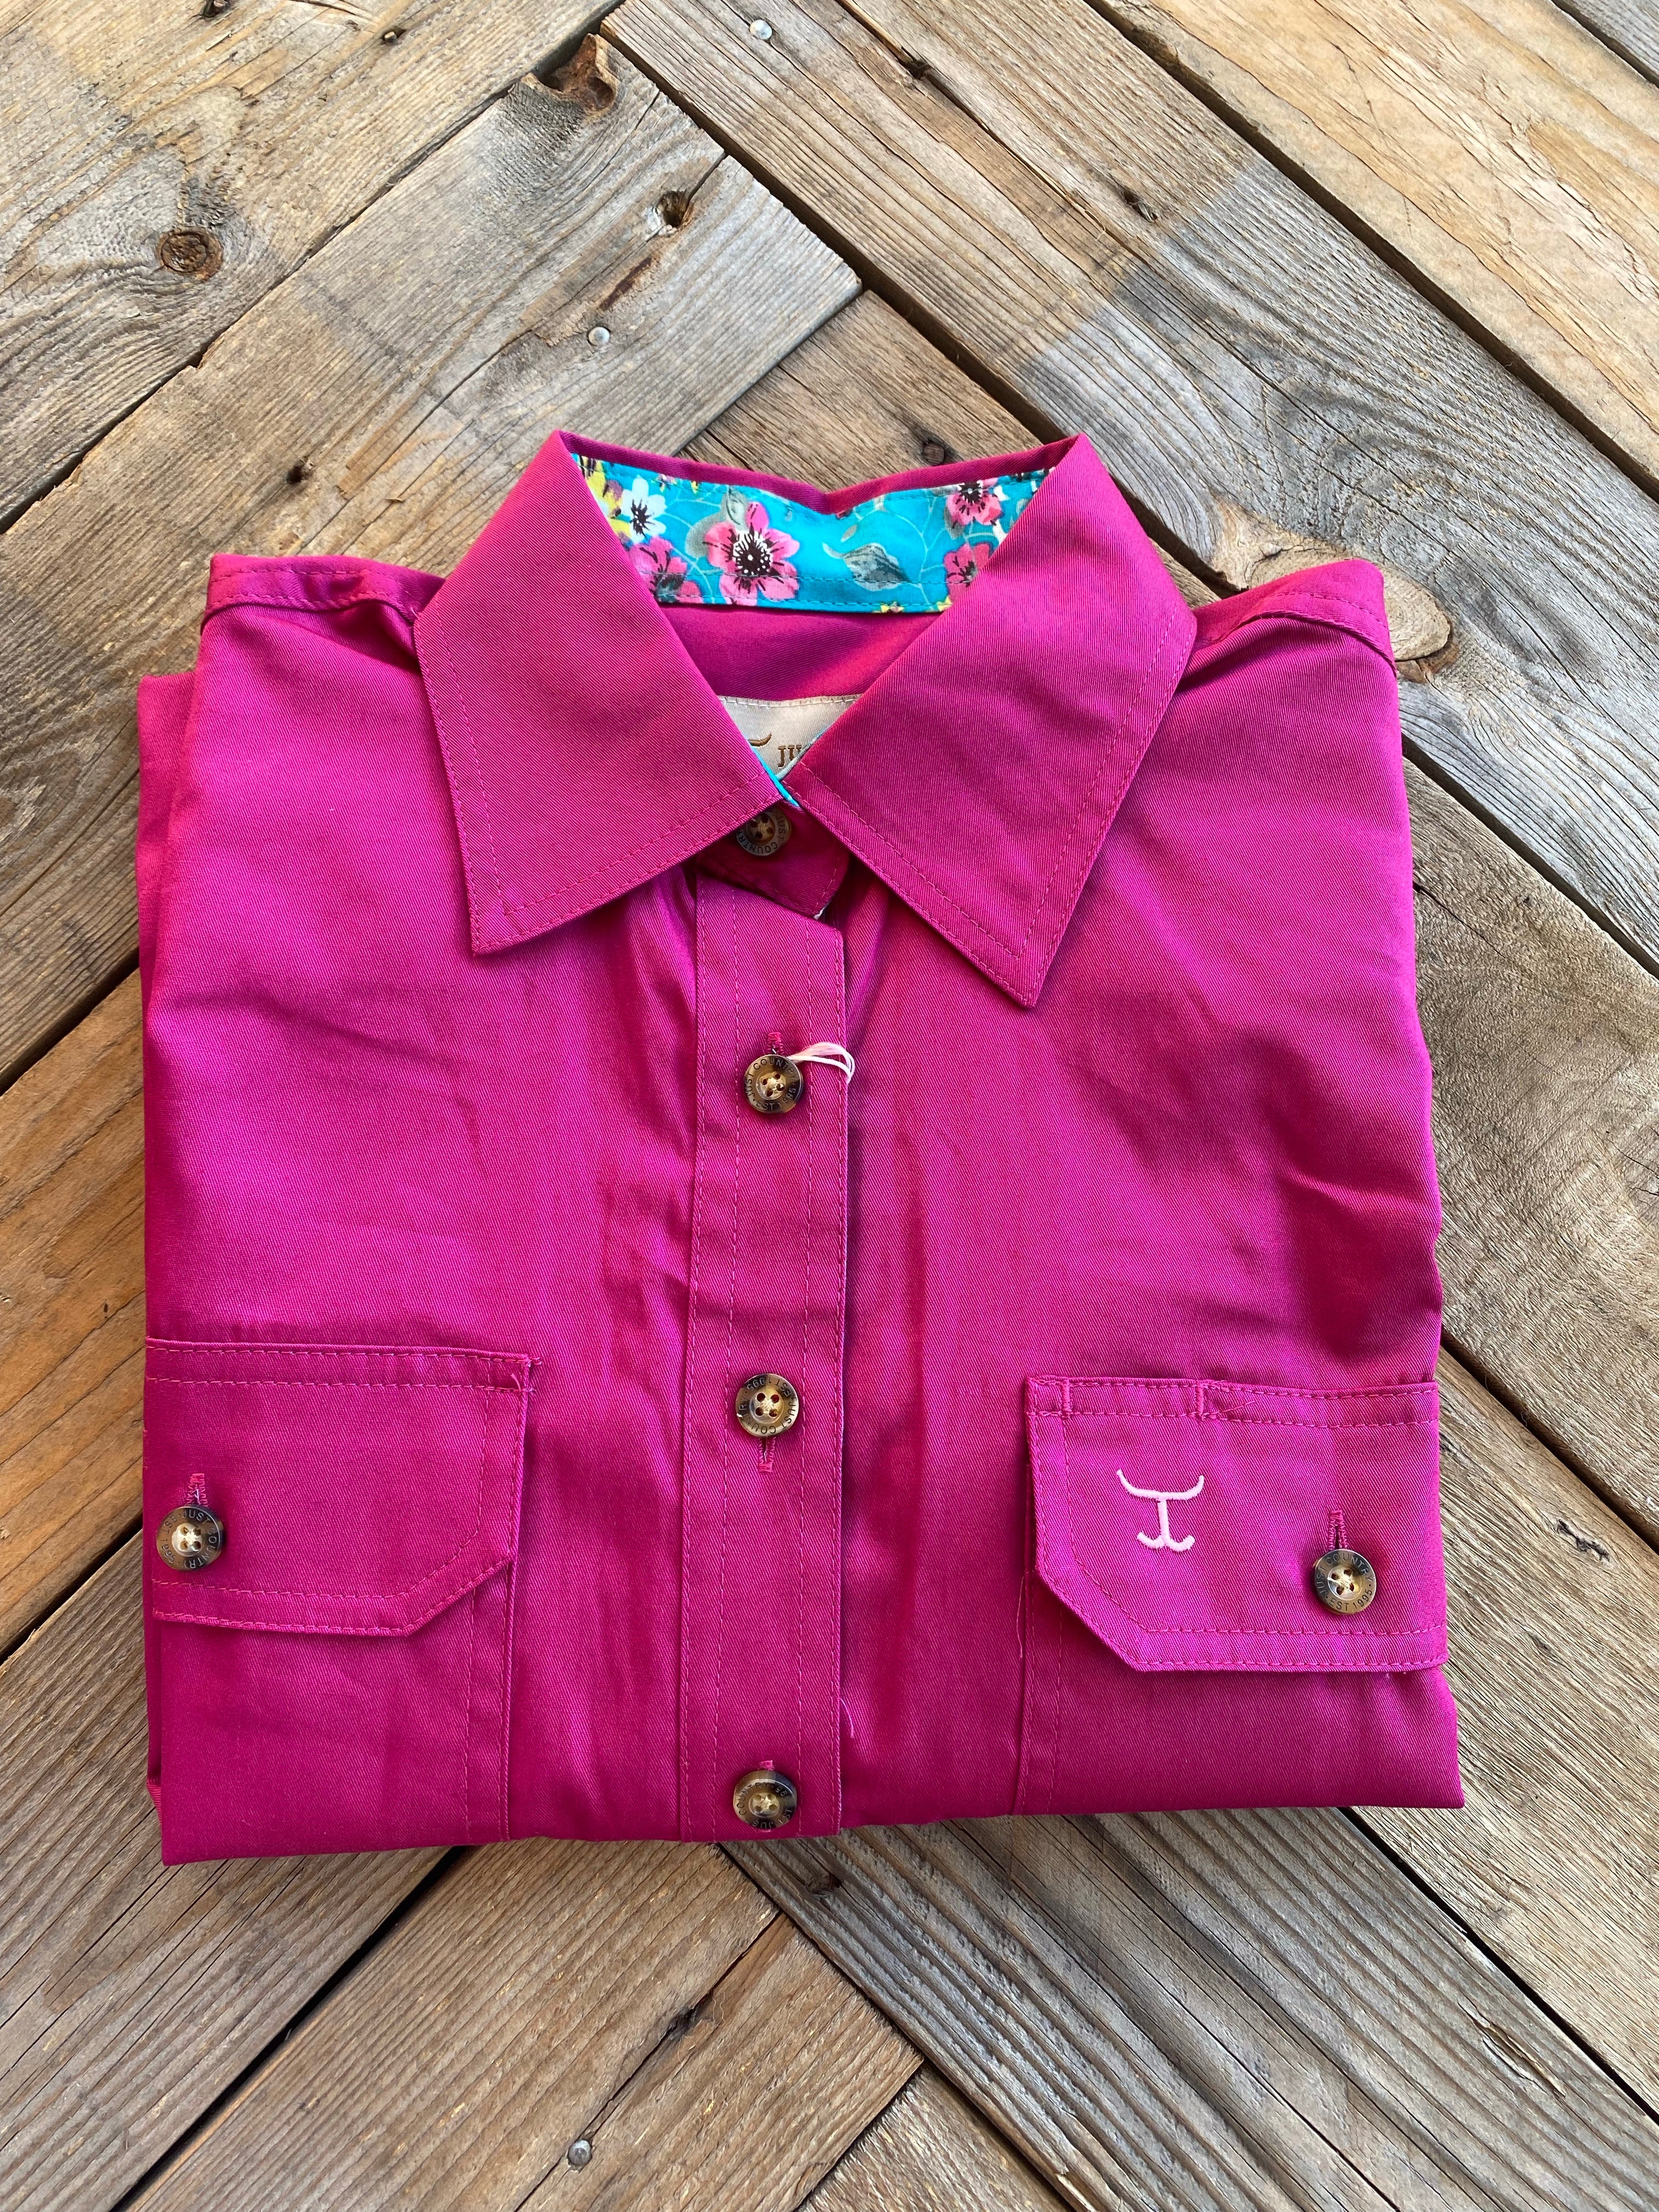 Just Country Jahna Half Button Workshirt Magenta/Turquoise Floral